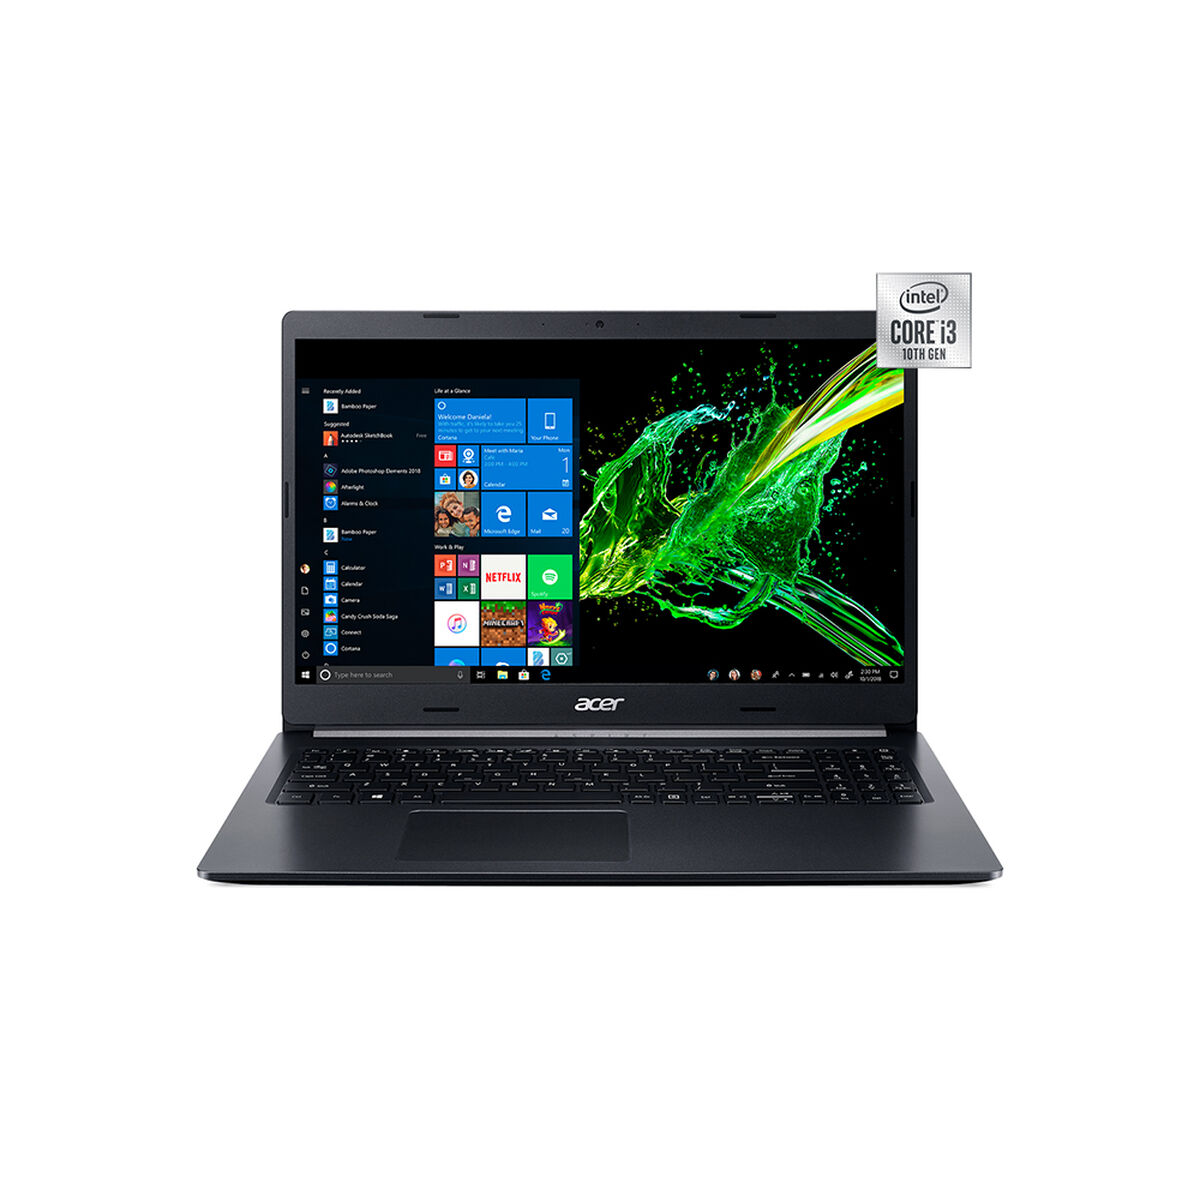 Notebook Acer A515-54-34VM-1 Core i3 8GB 512GB SSD 15.6"